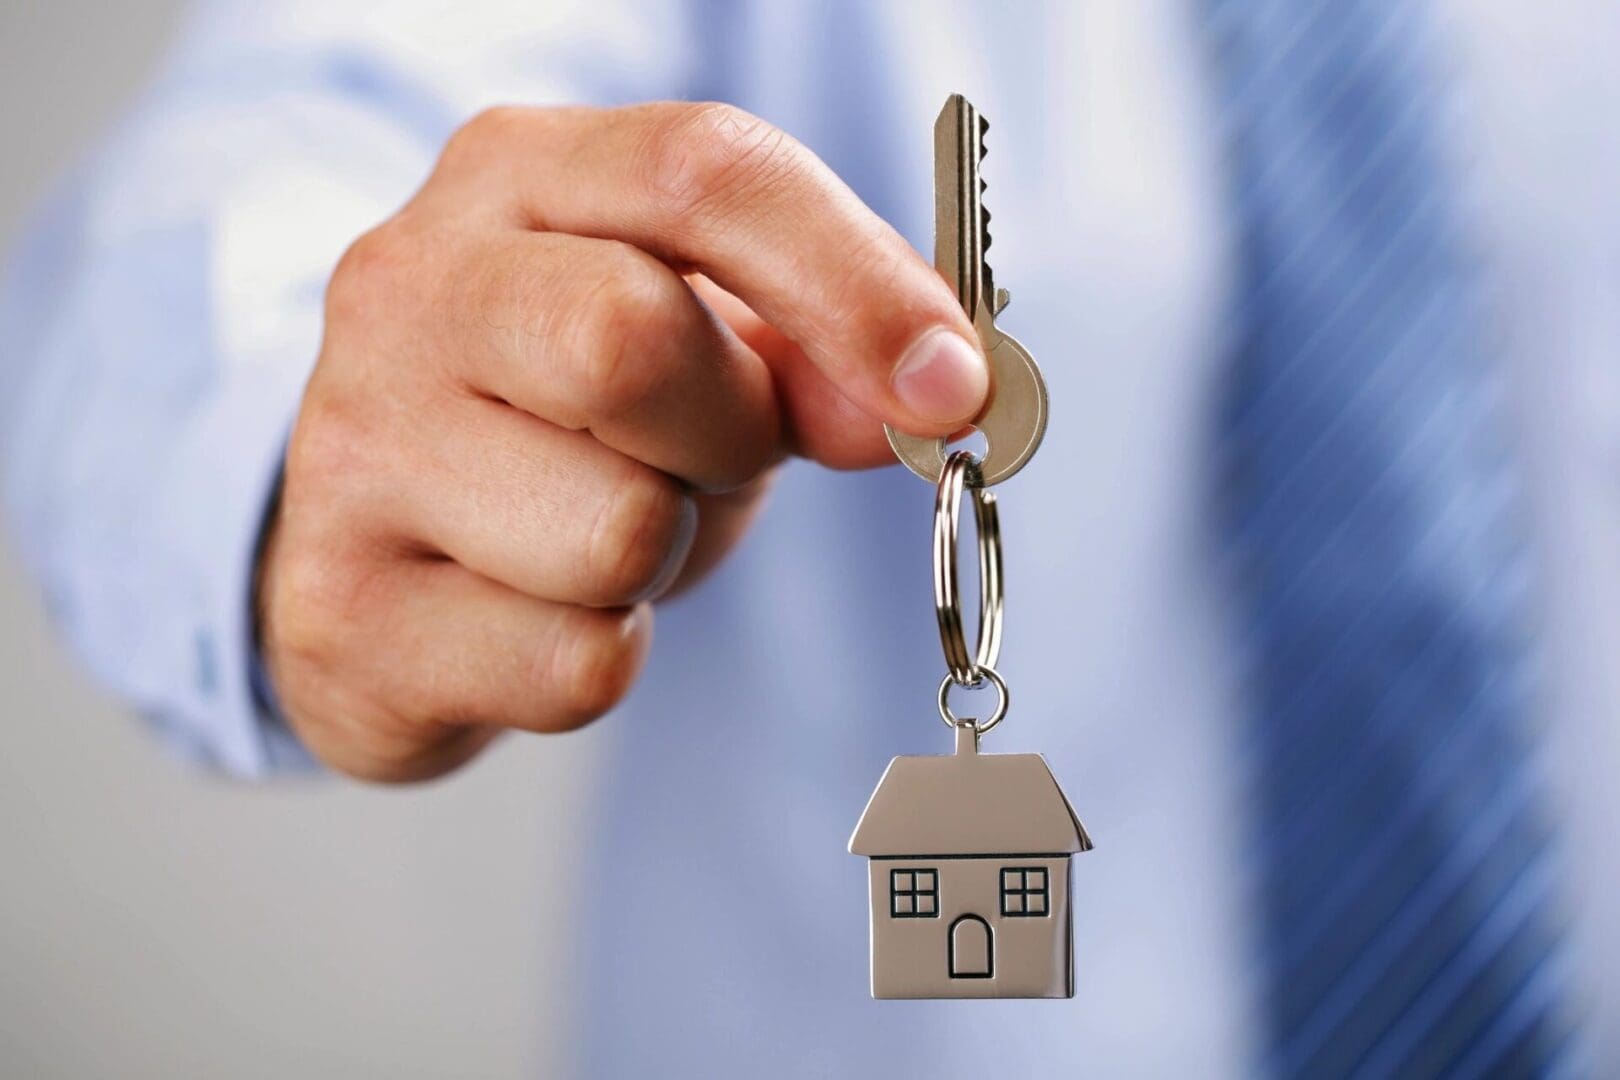 A person in a business suit holding a keychain with a house-shaped key fob.